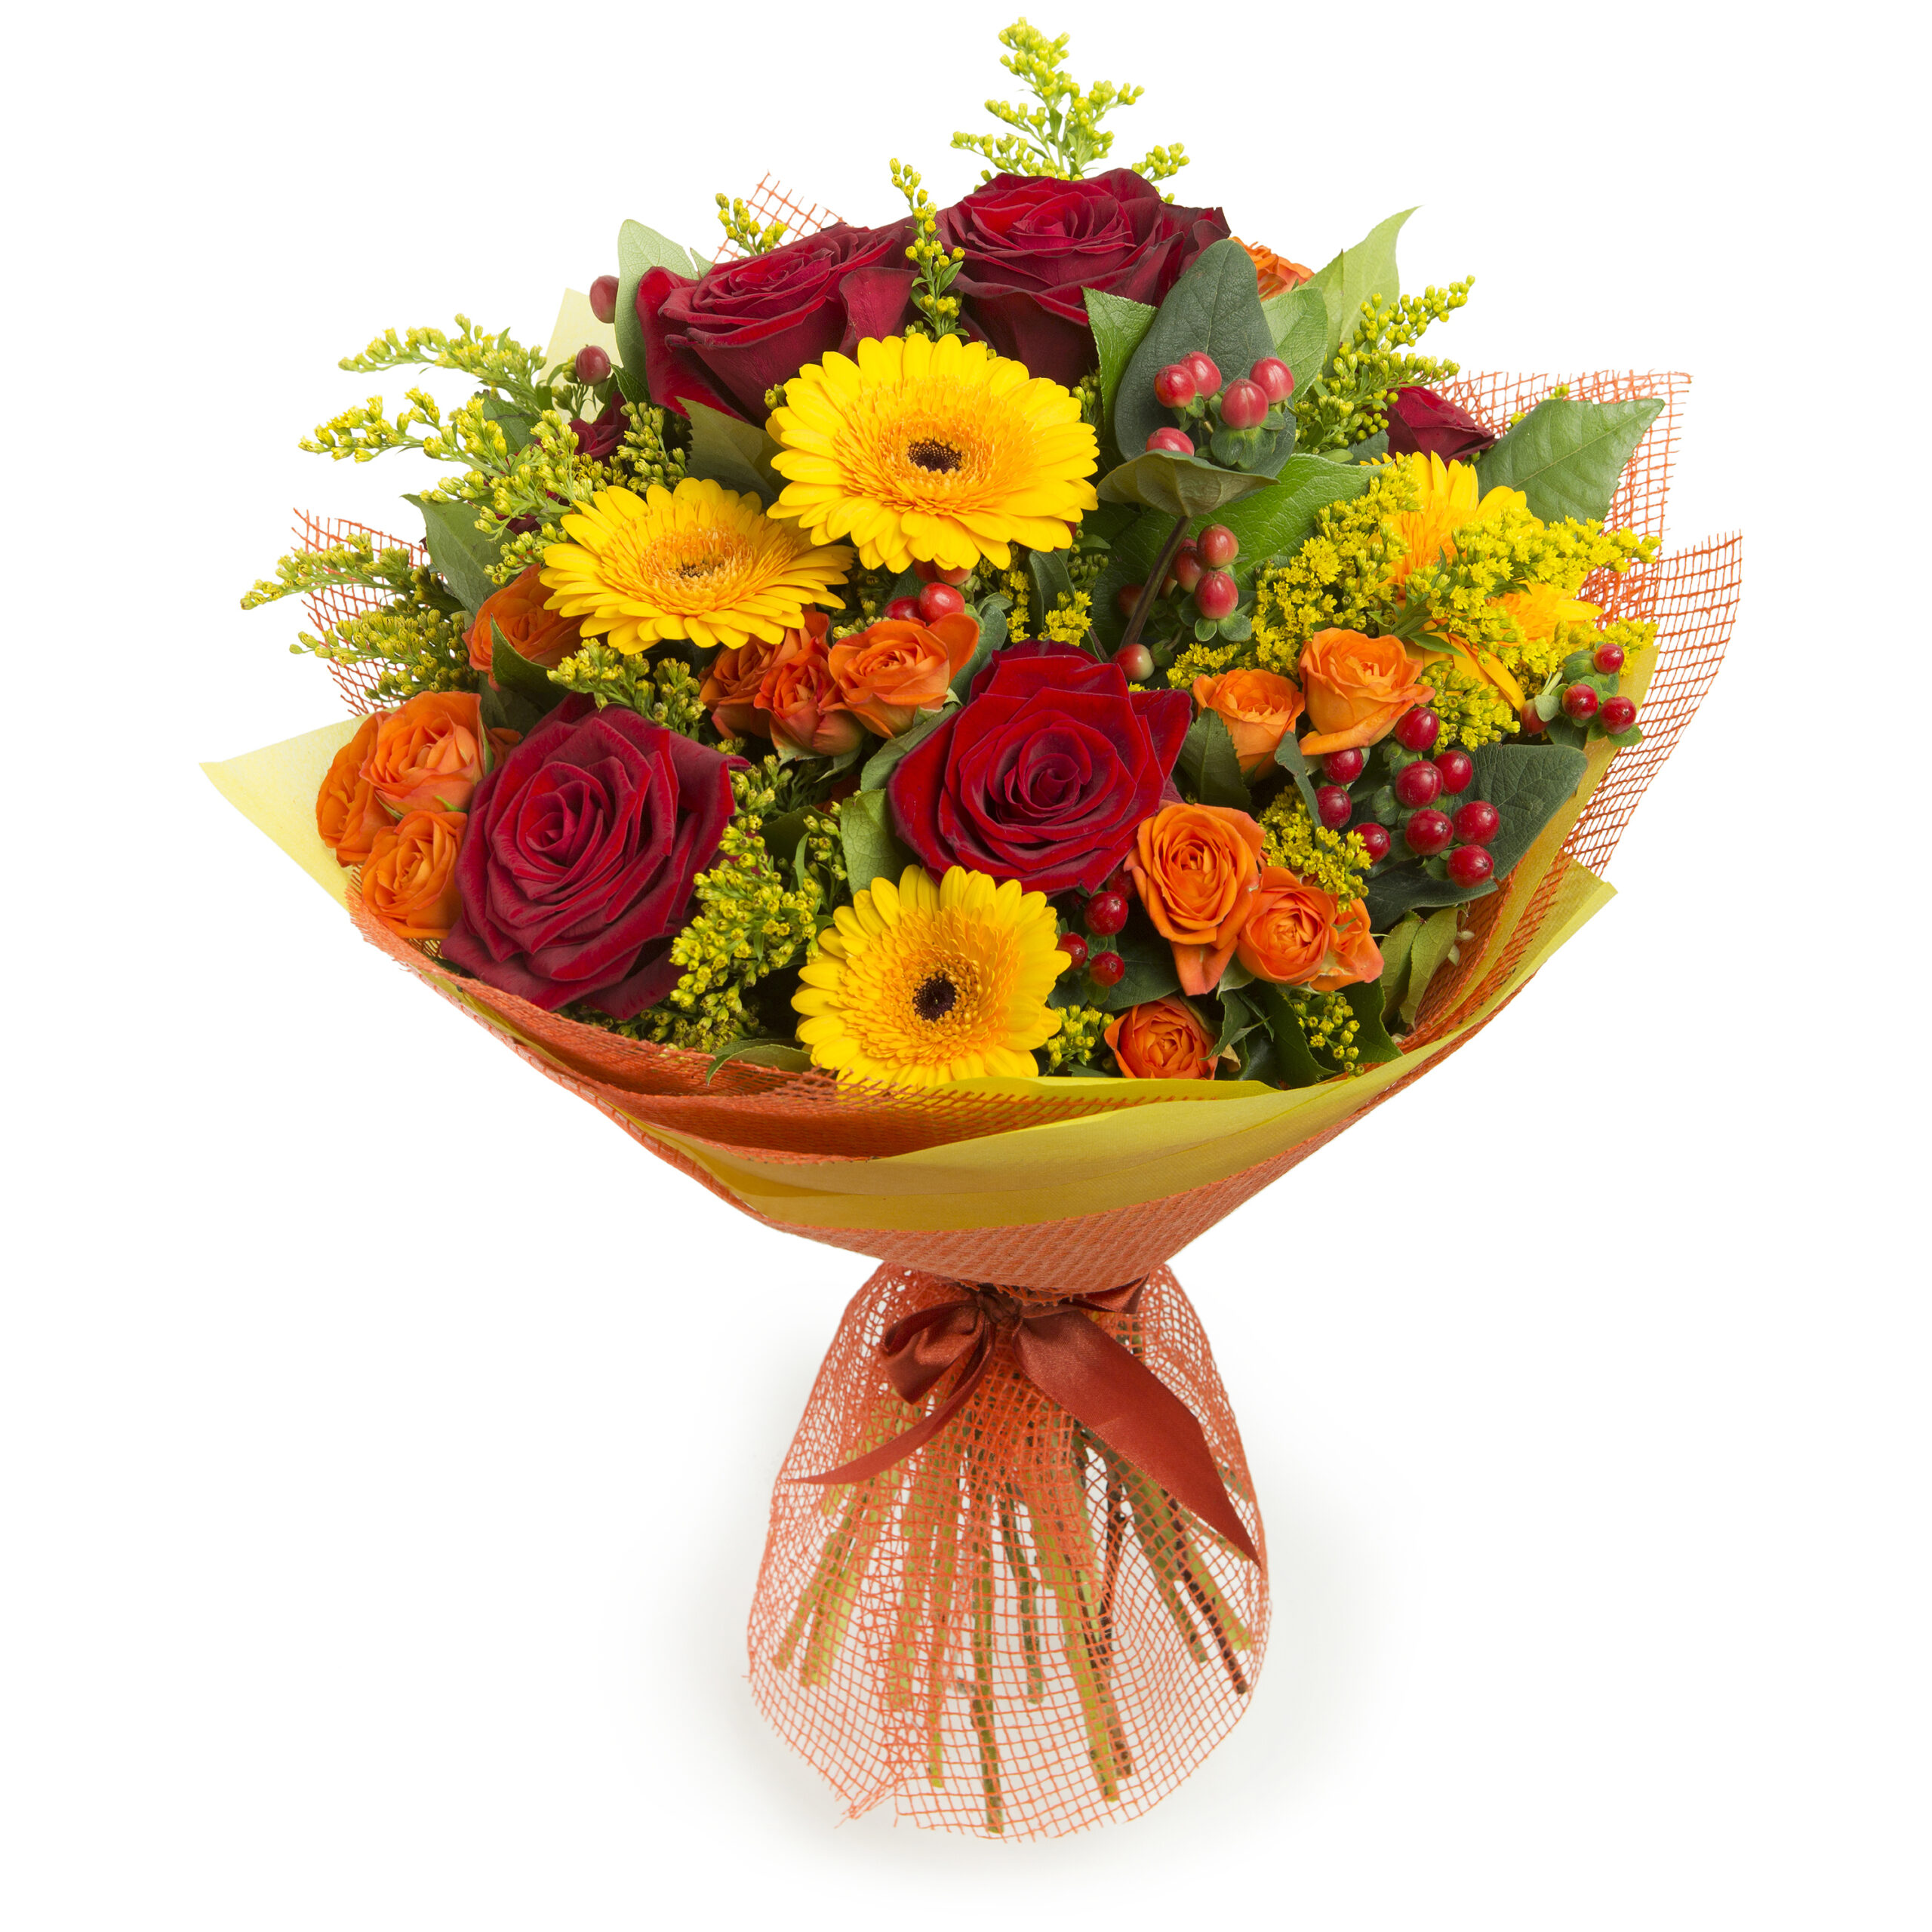 Send a Bouquet of Roses and Gerberas Daisies to Spain | Botanic Flora